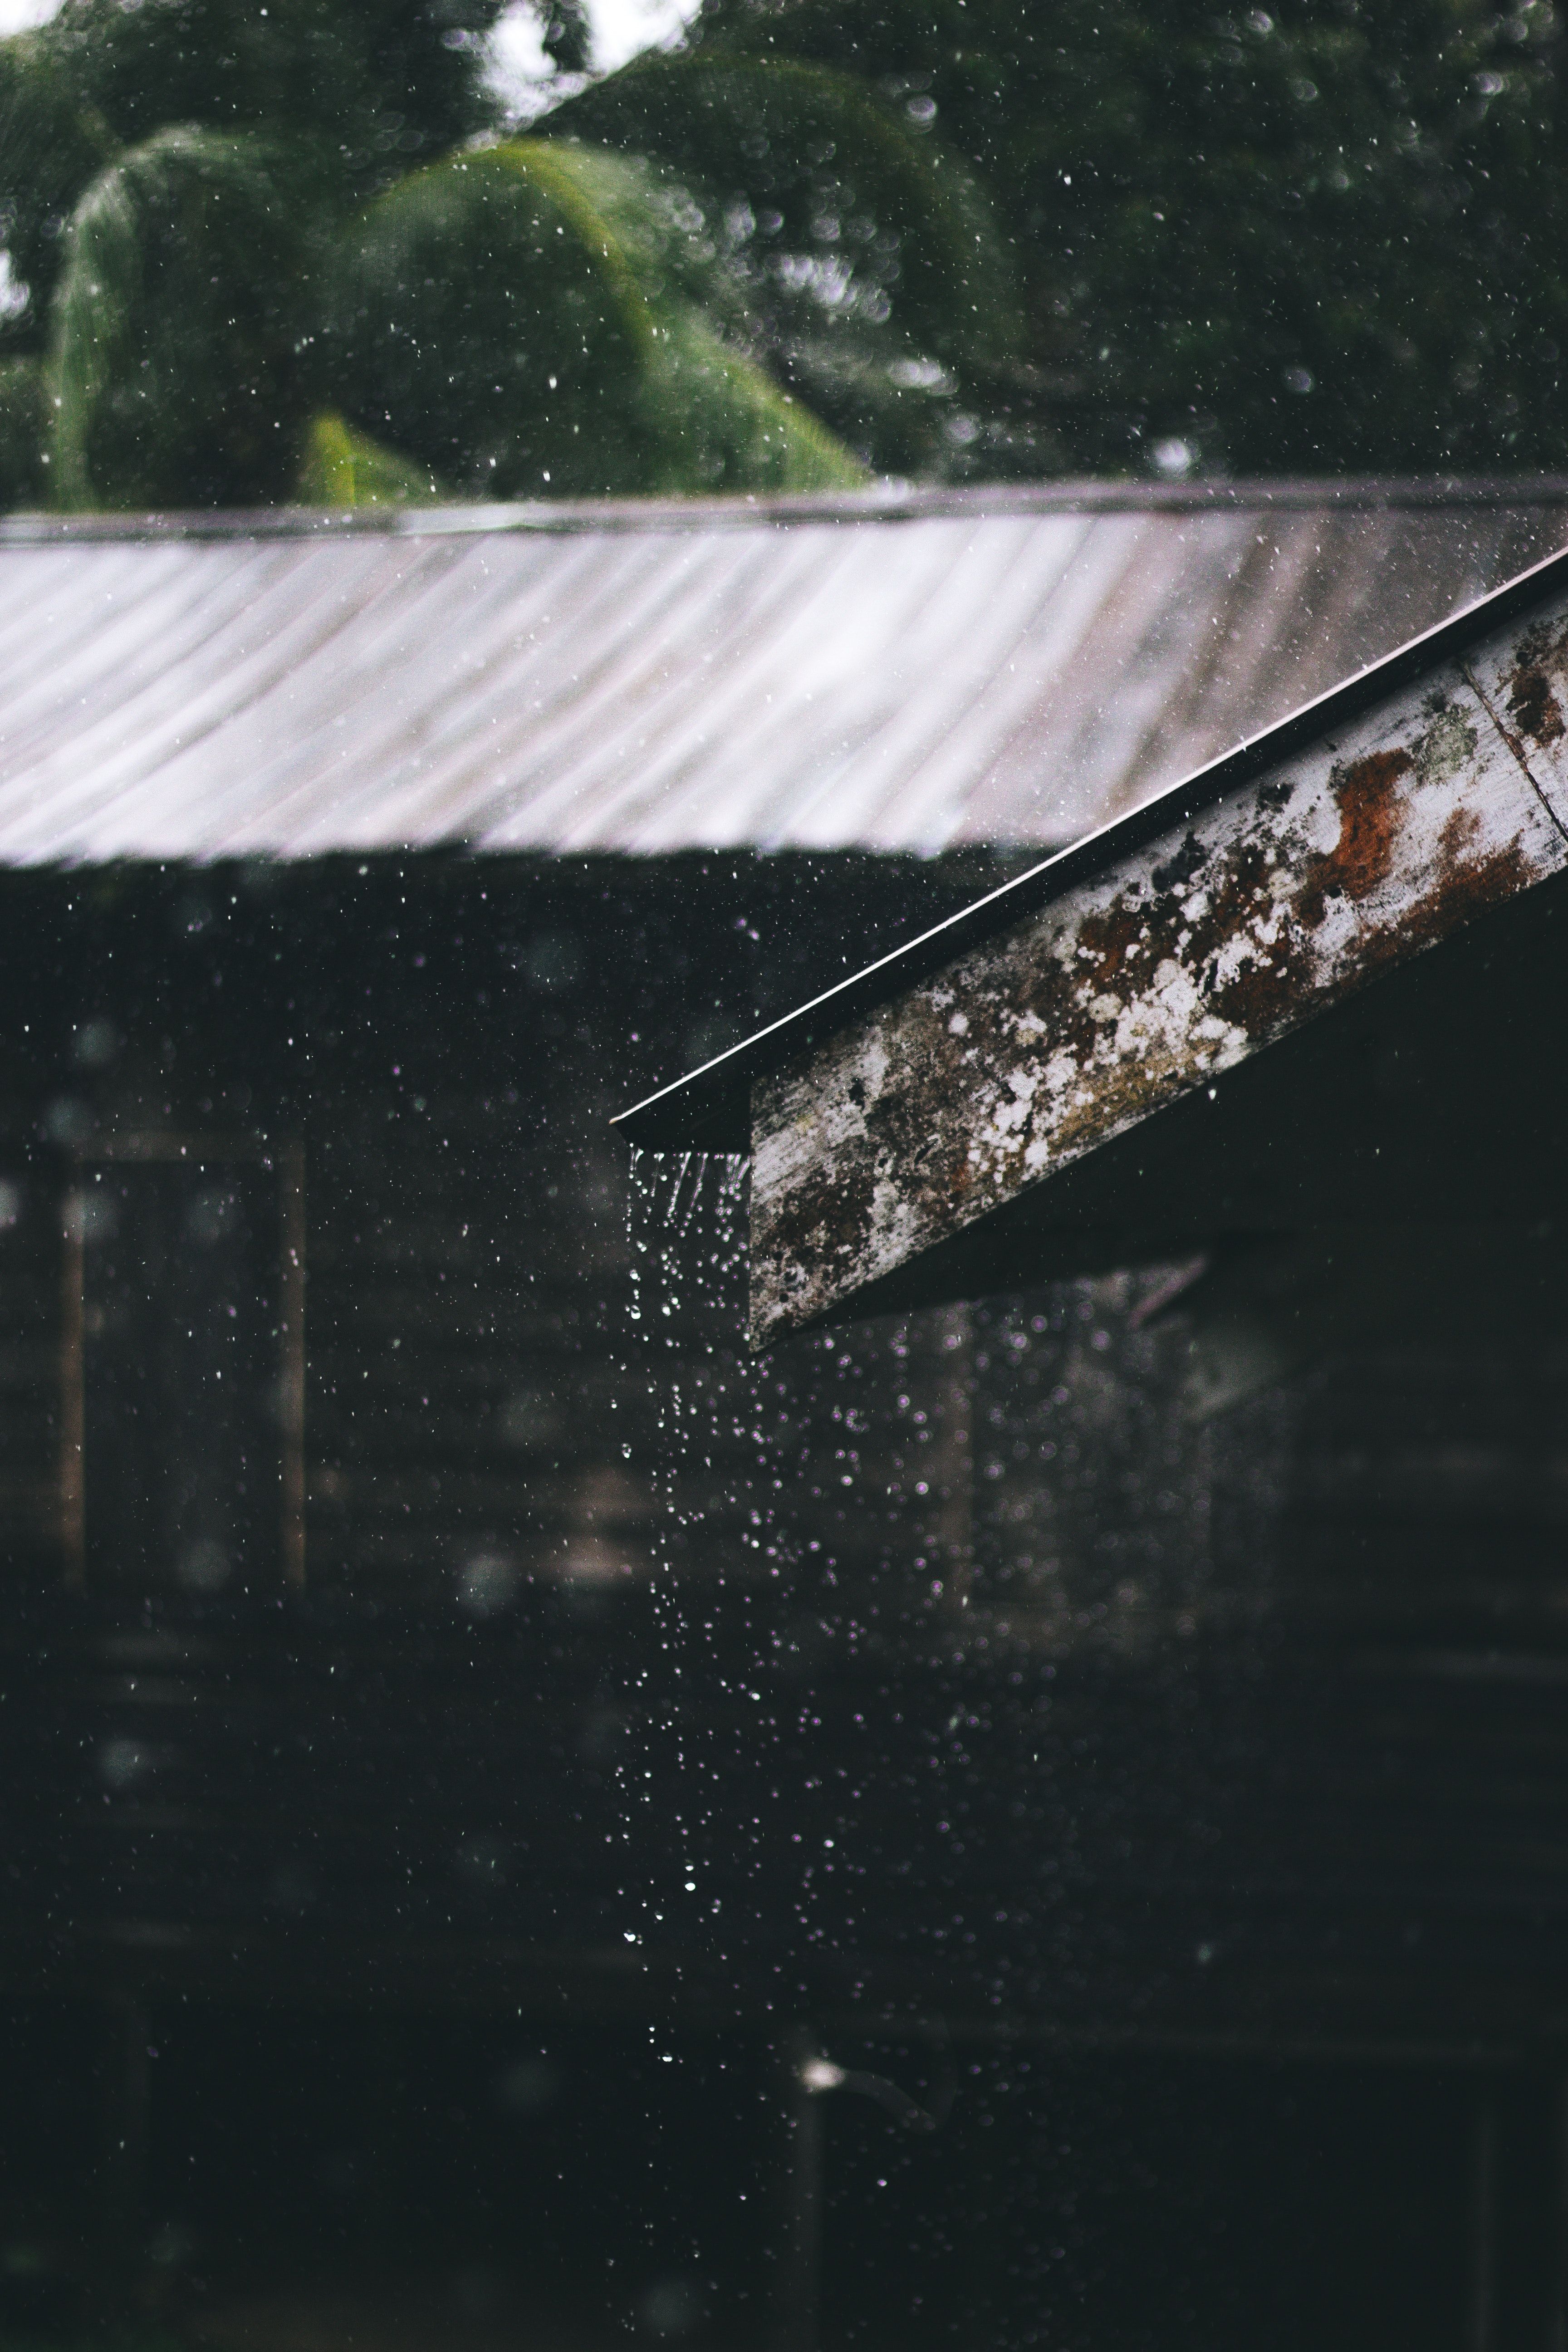 A house with a metal roof with water pouring down the edge of the roof. - Rain